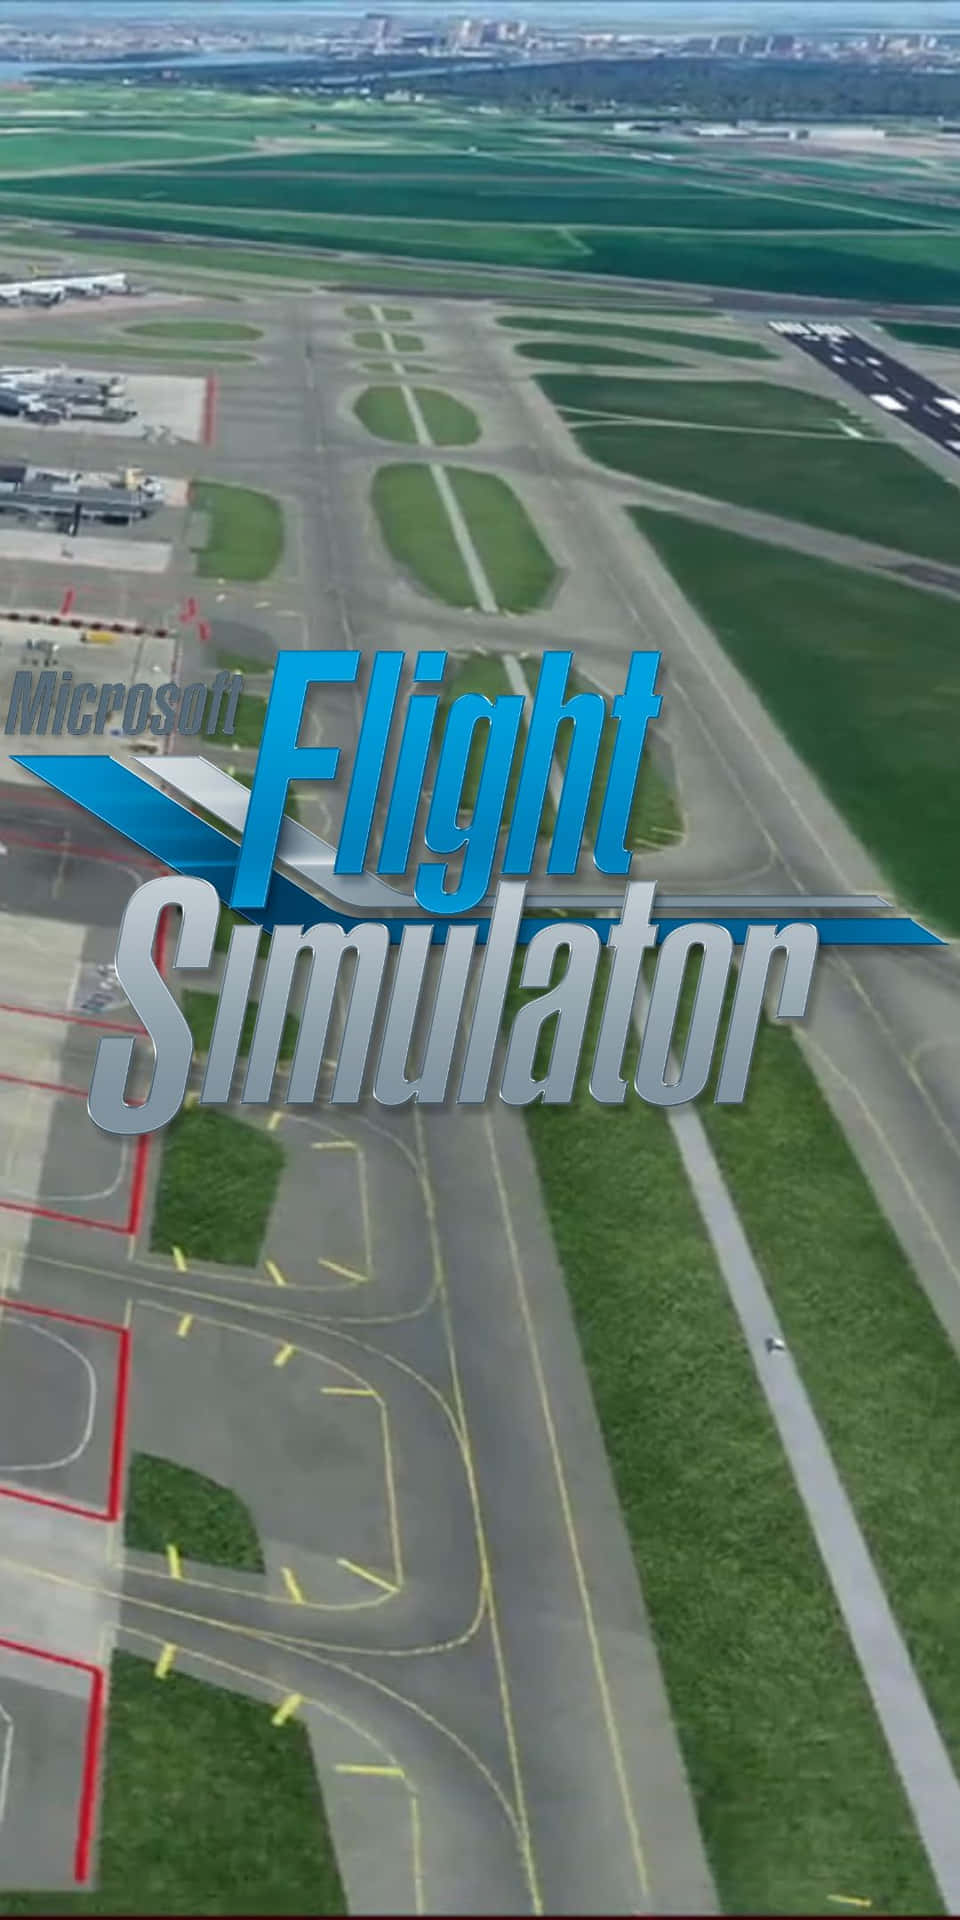 Travell to new heights with Pixel 3 and Microsoft Flight Simulator